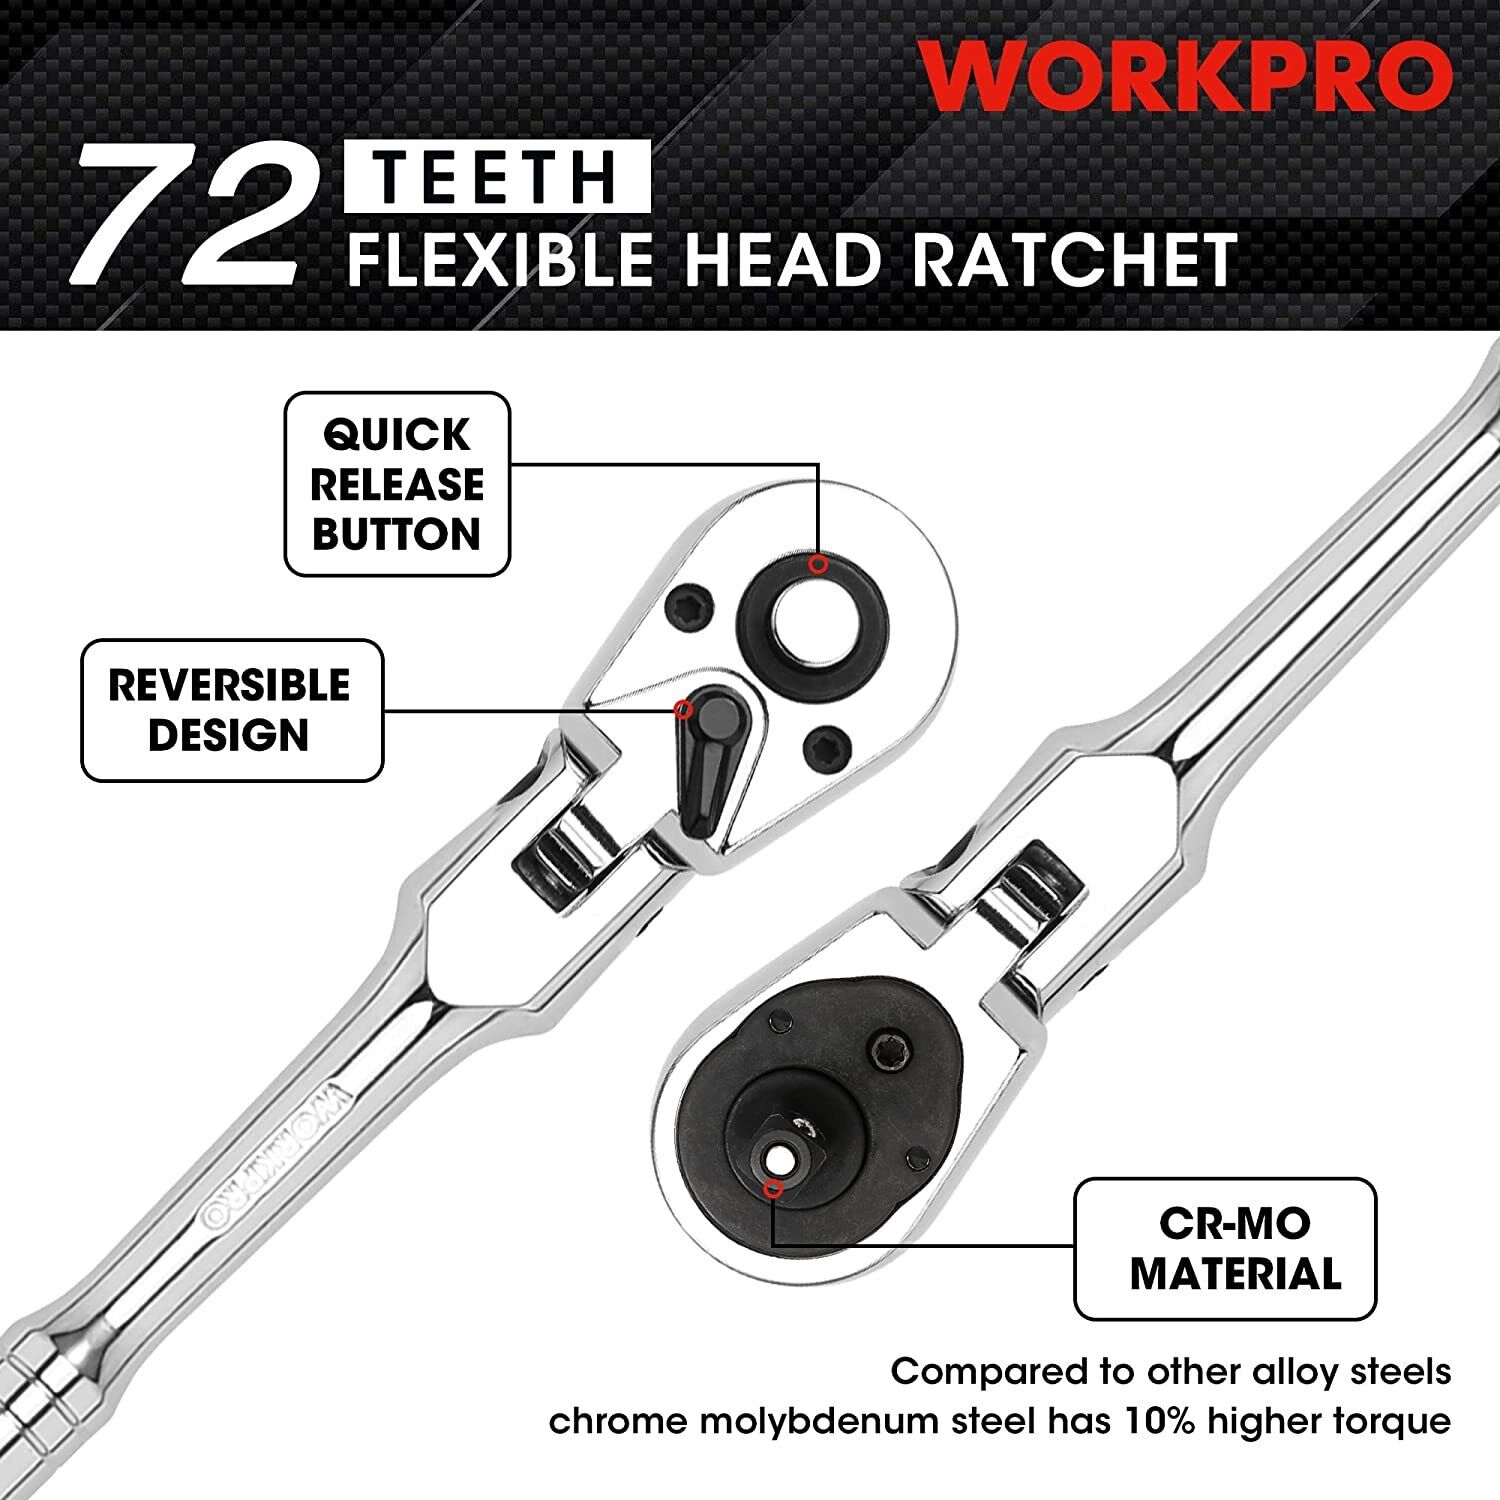 WORKPRO 3/8" Drive 72-Tooth Flex Head Ratchet Chromium Plated Quick Release New